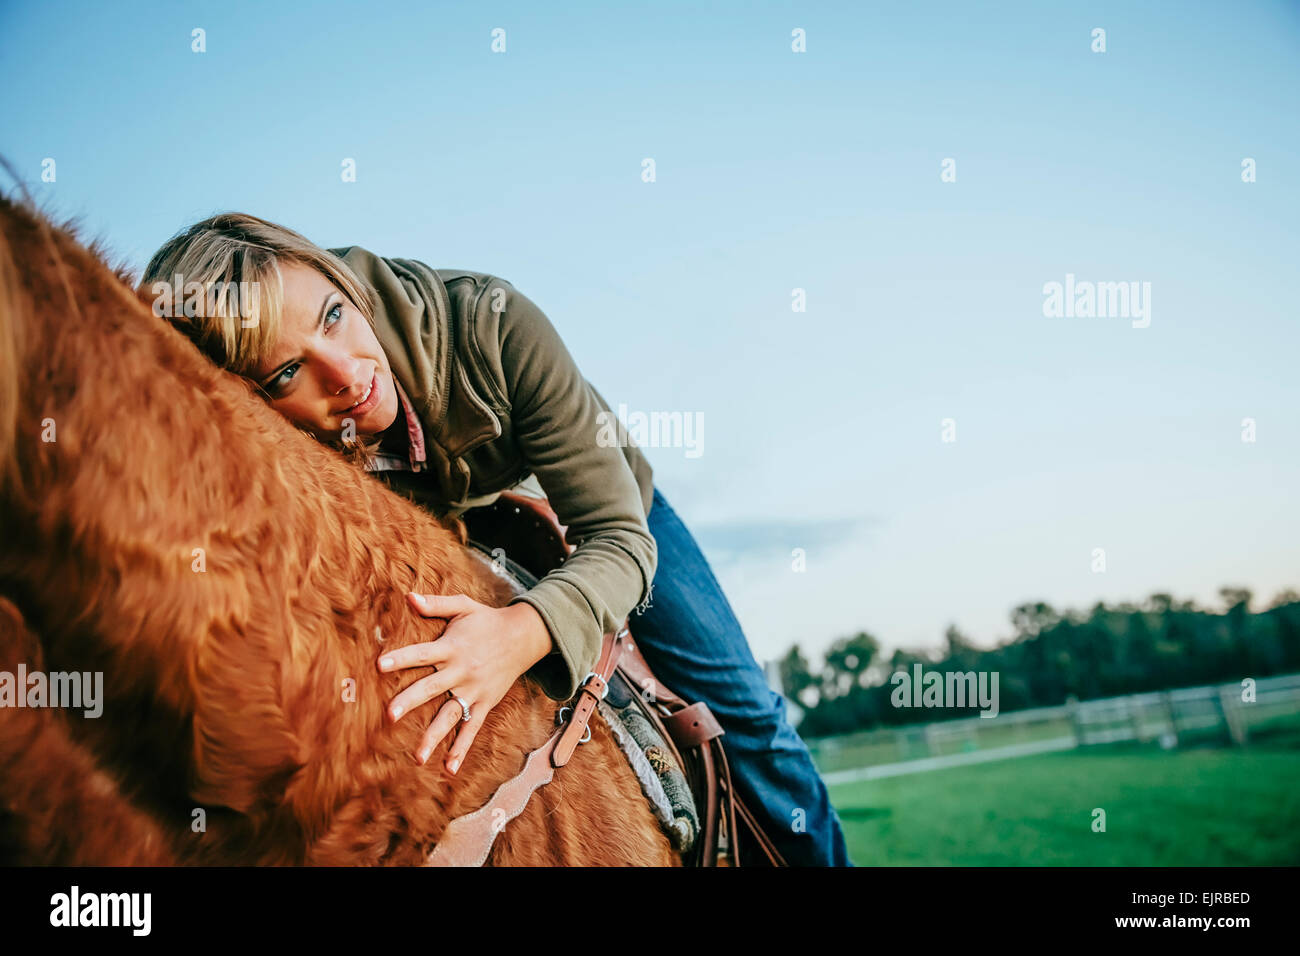 Caucasian woman riding horse on ranch Stock Photo